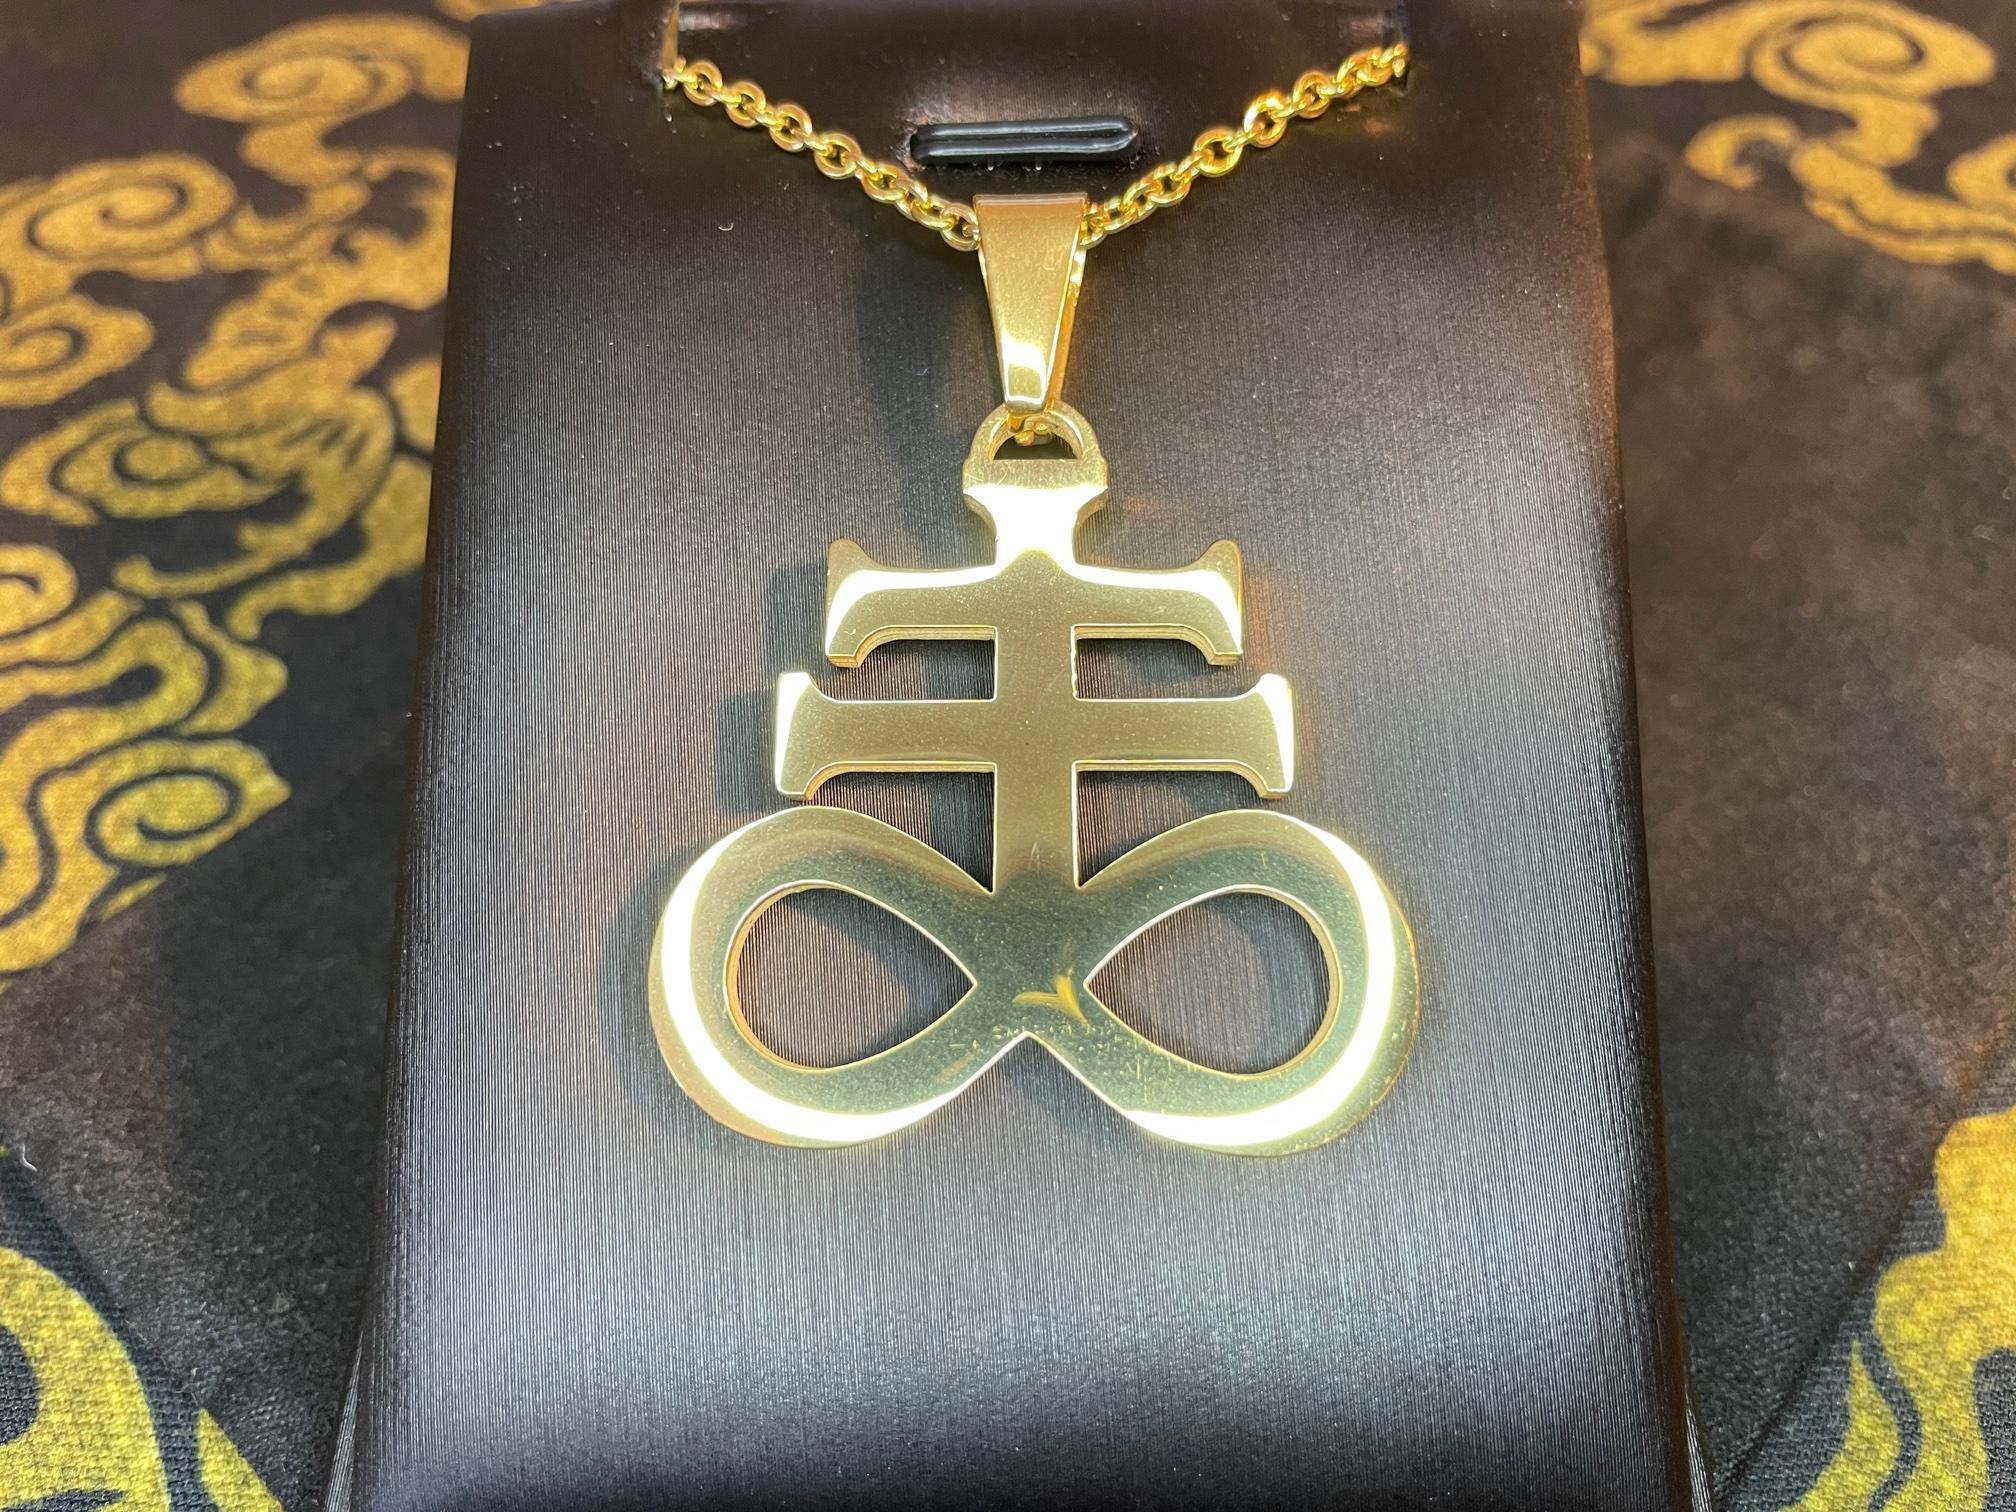 Leviathan Cross Sigil of Lucifer Baphomet Stainless Steel Pendant Necklace Gothic Satanic Wiccan Pagan Druid Occult Darkness Jewelry Gold